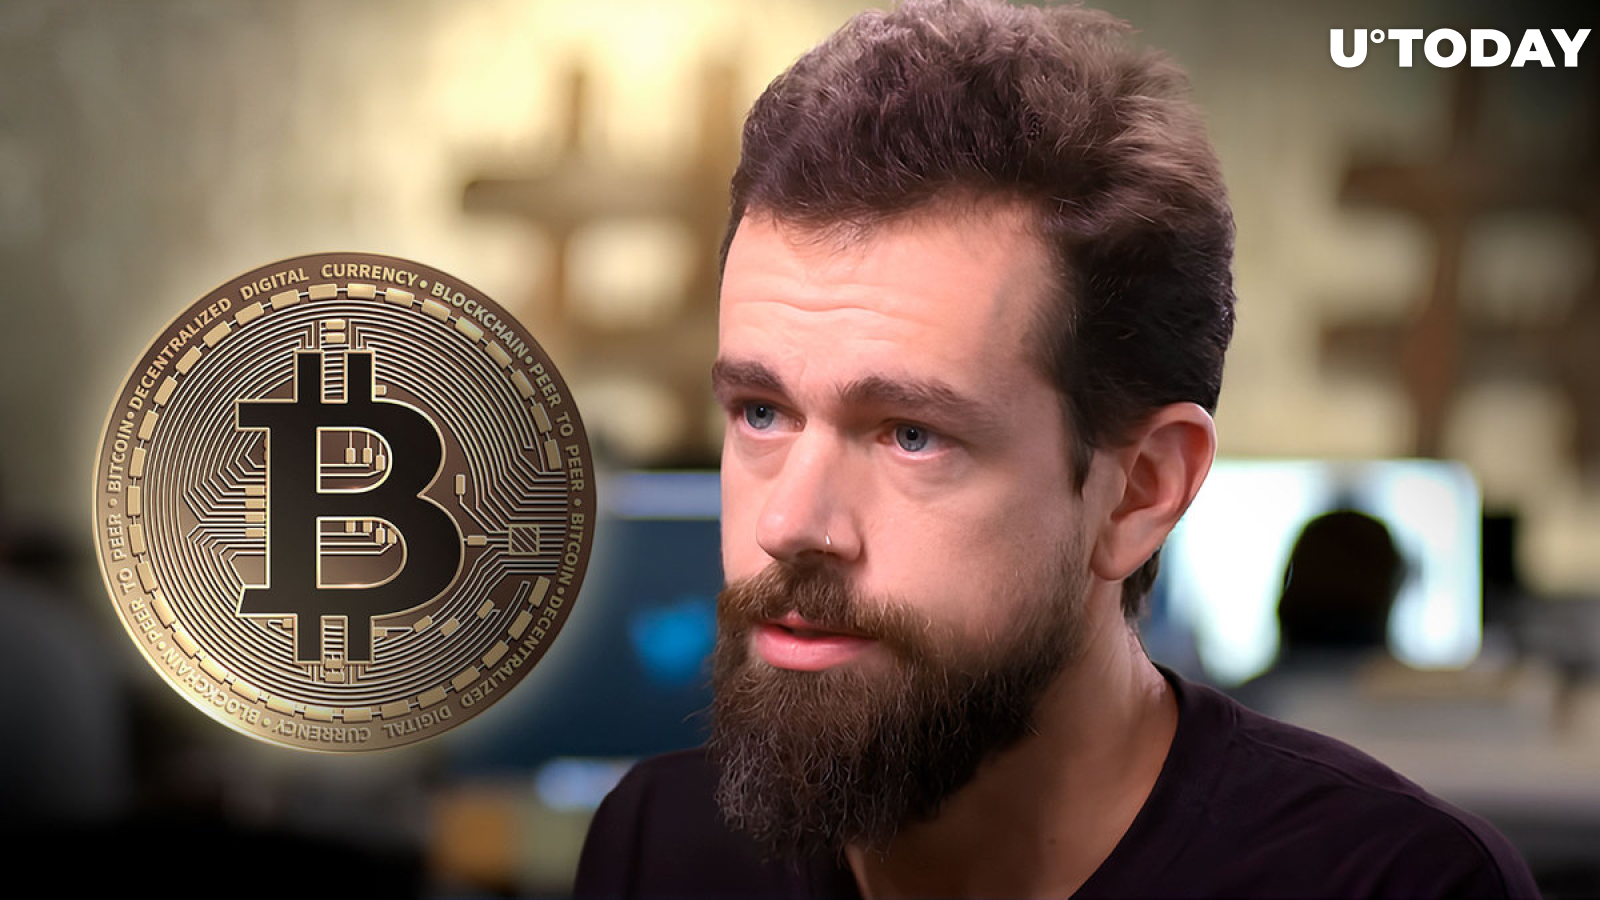 Twitter Founder Dorsey Invests Millions in Decentralized Bitcoin (BTC) Mining